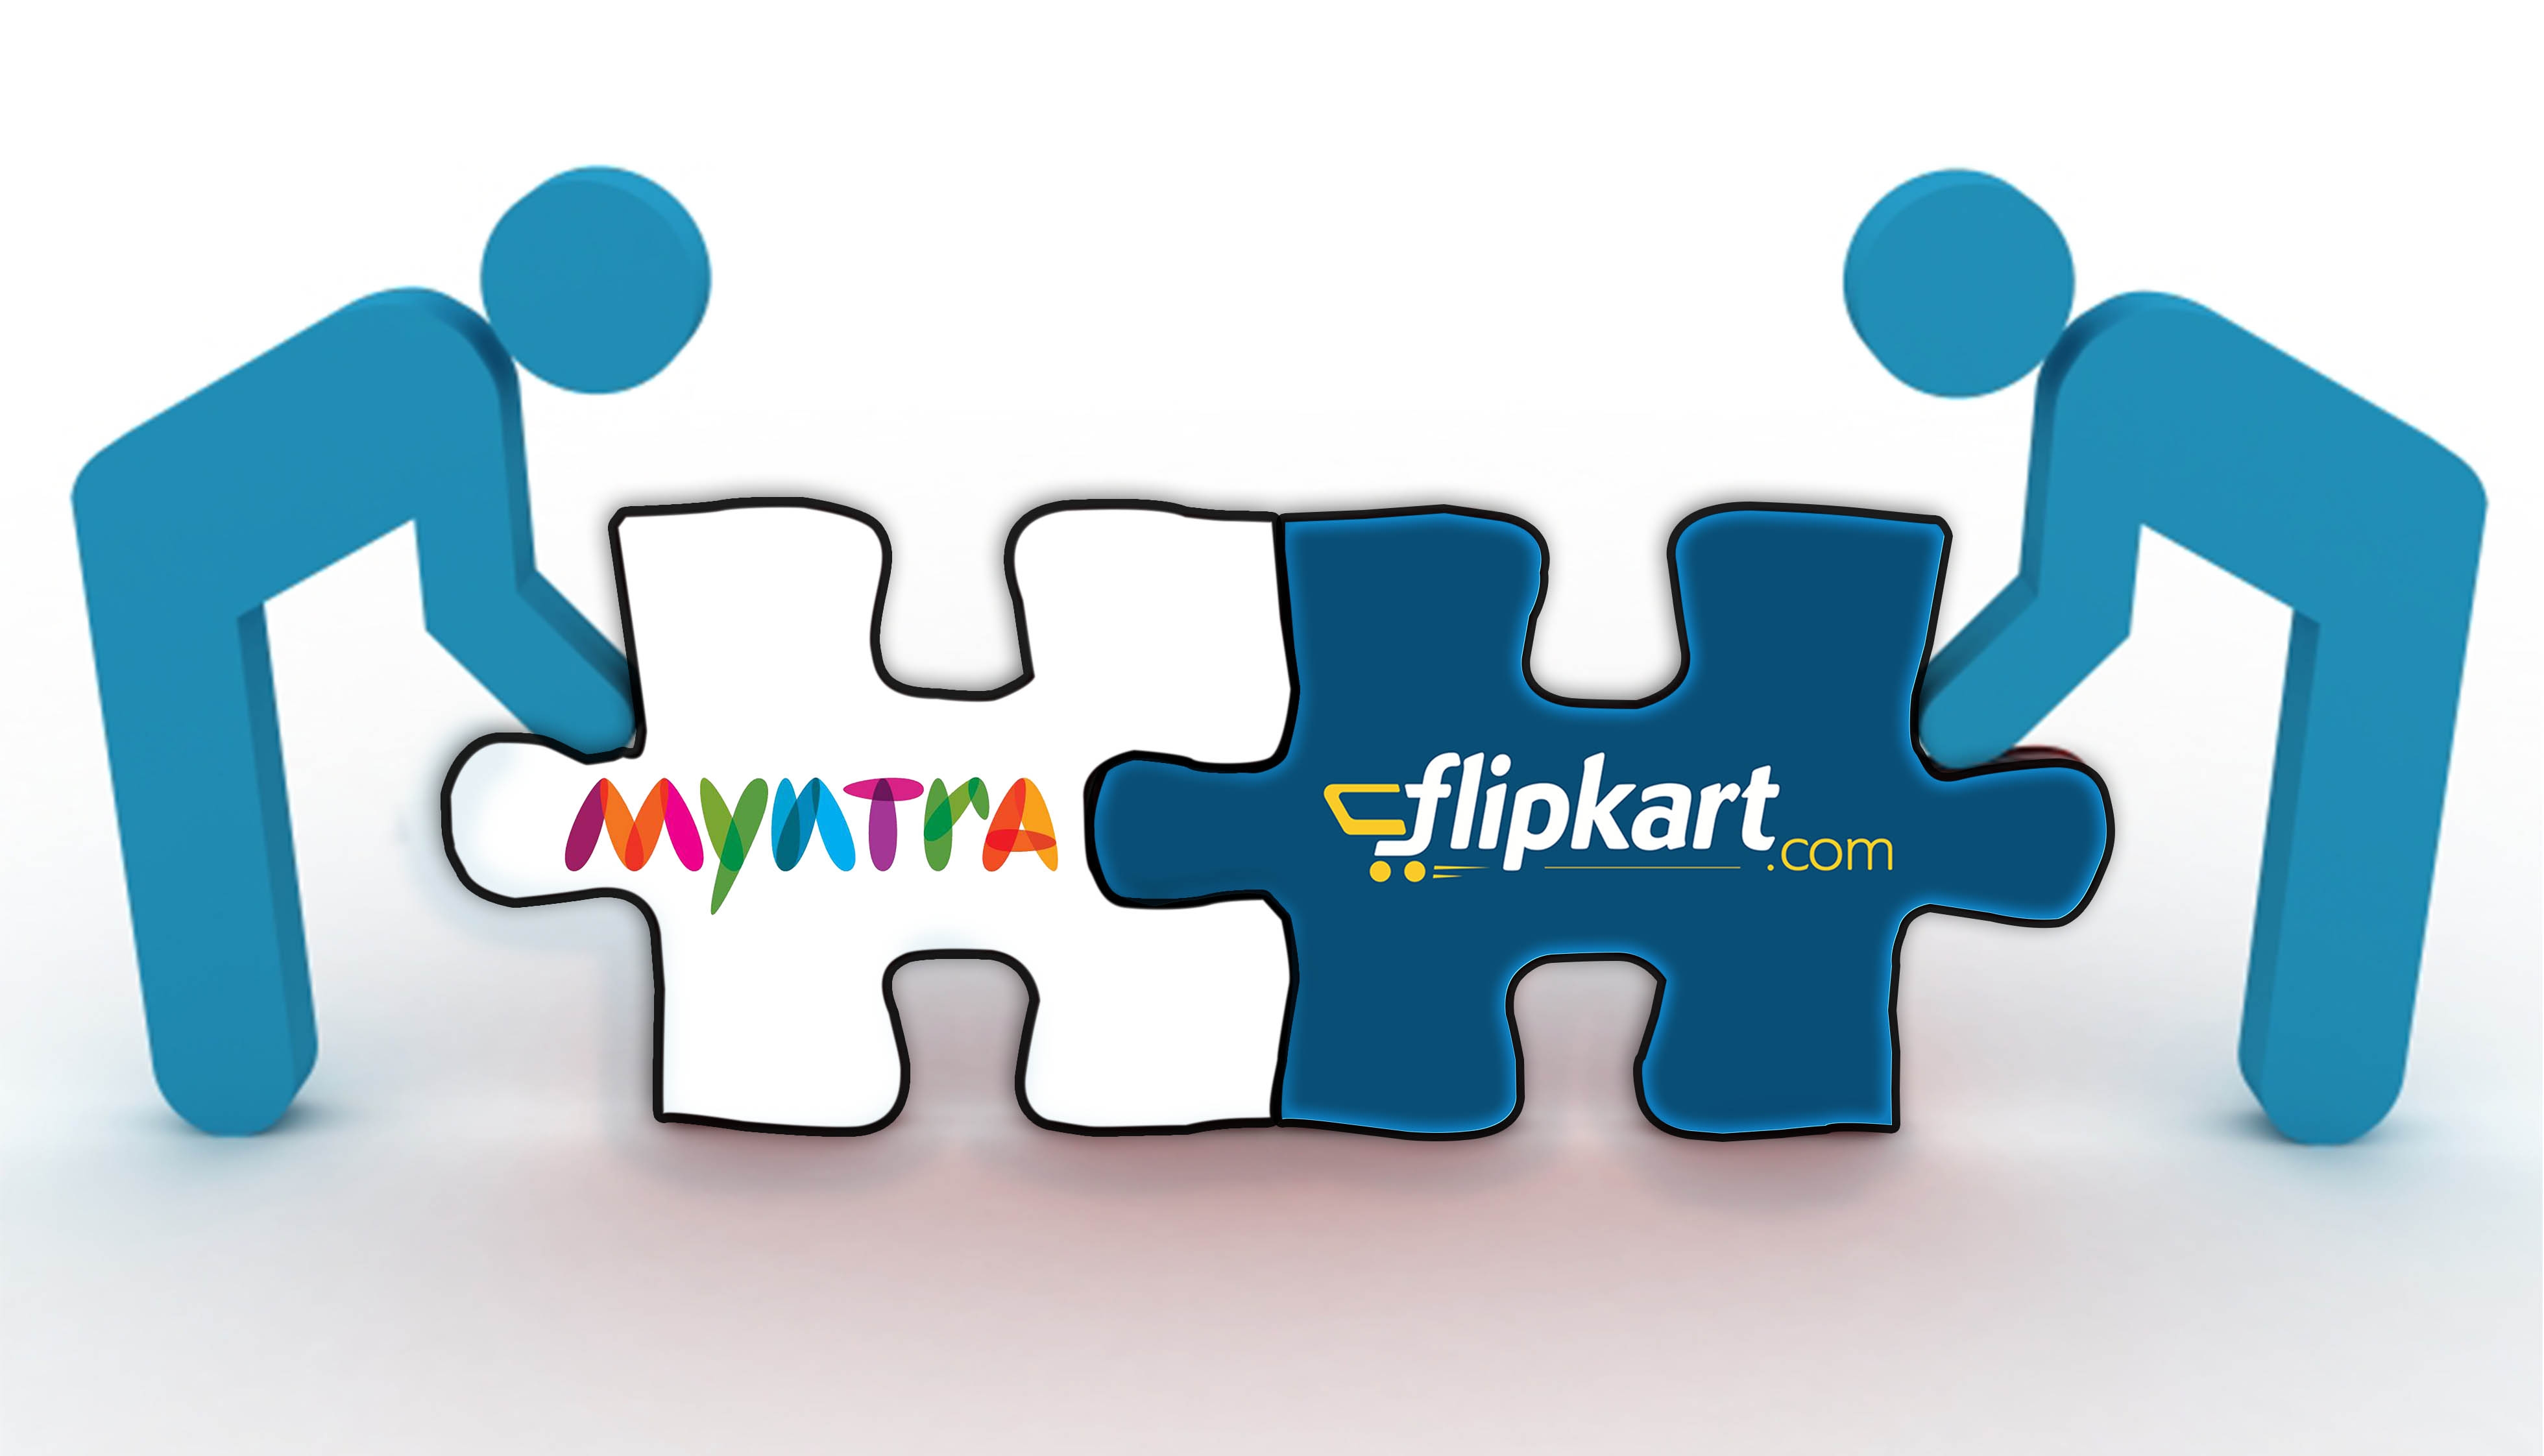 Myntra differentiating its positioning of two online portals